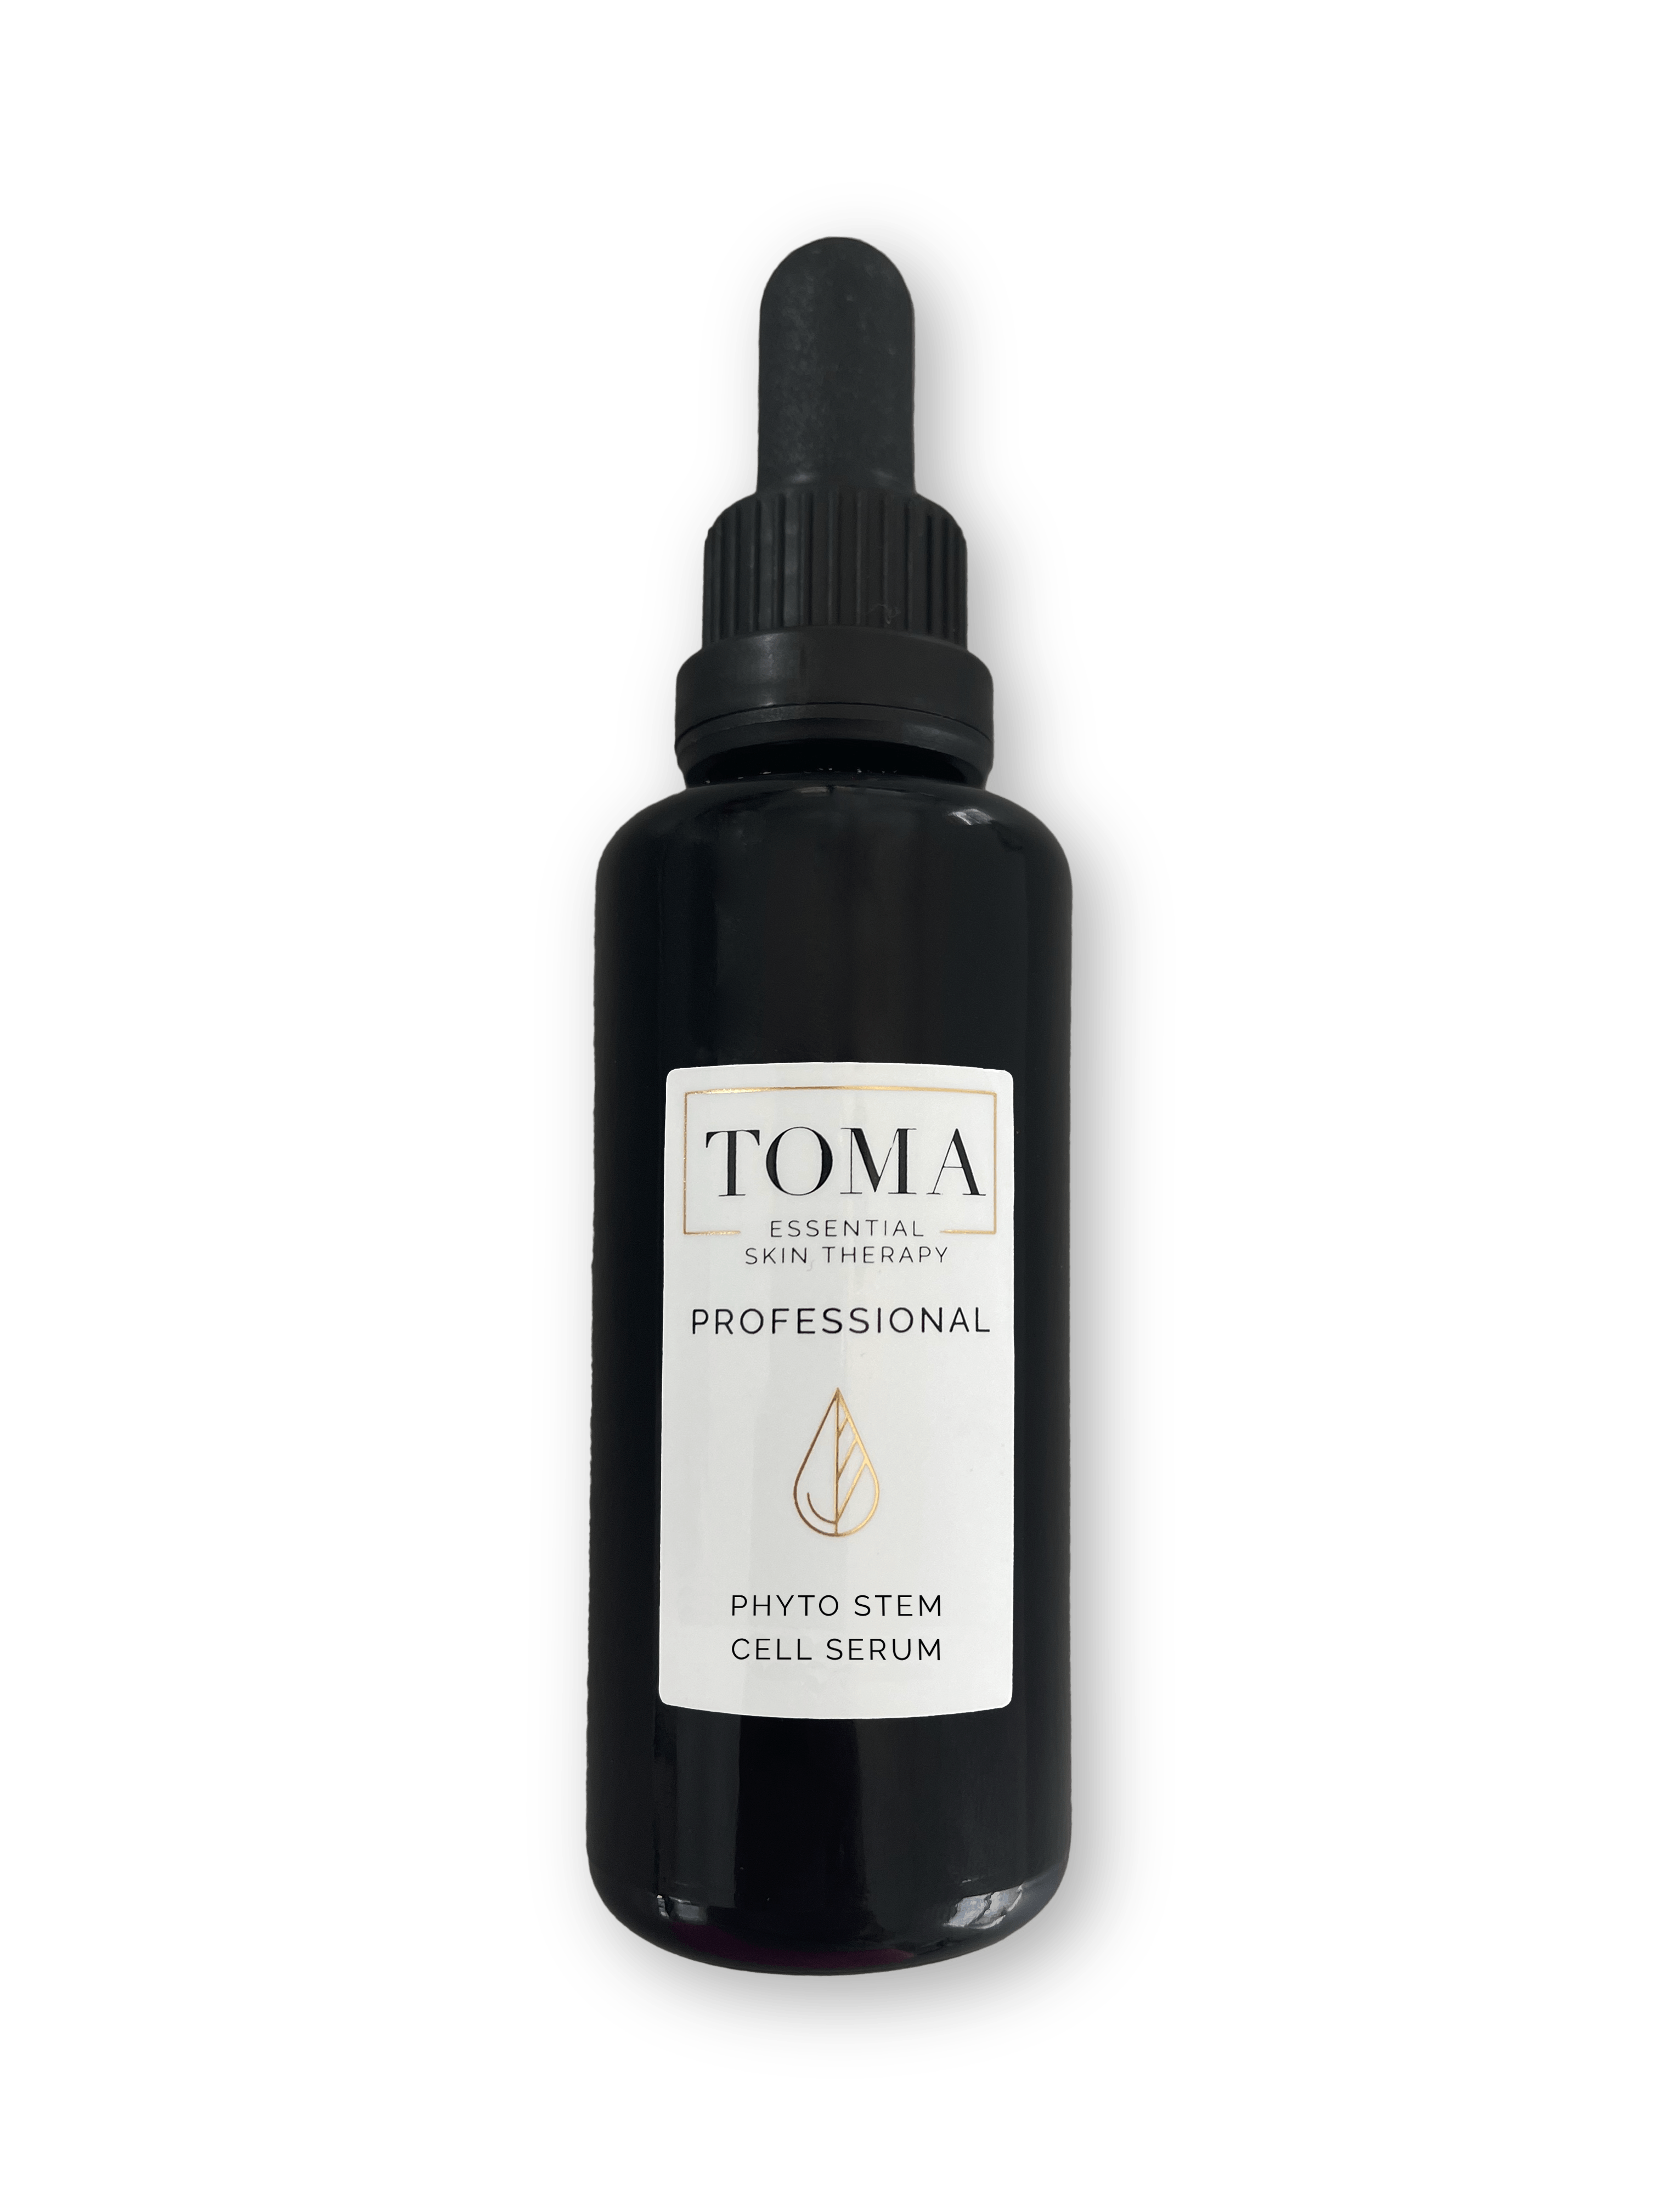 PhytoStem Cell Serum Backbar Skin Care TOMA Essential Skin Therapy 